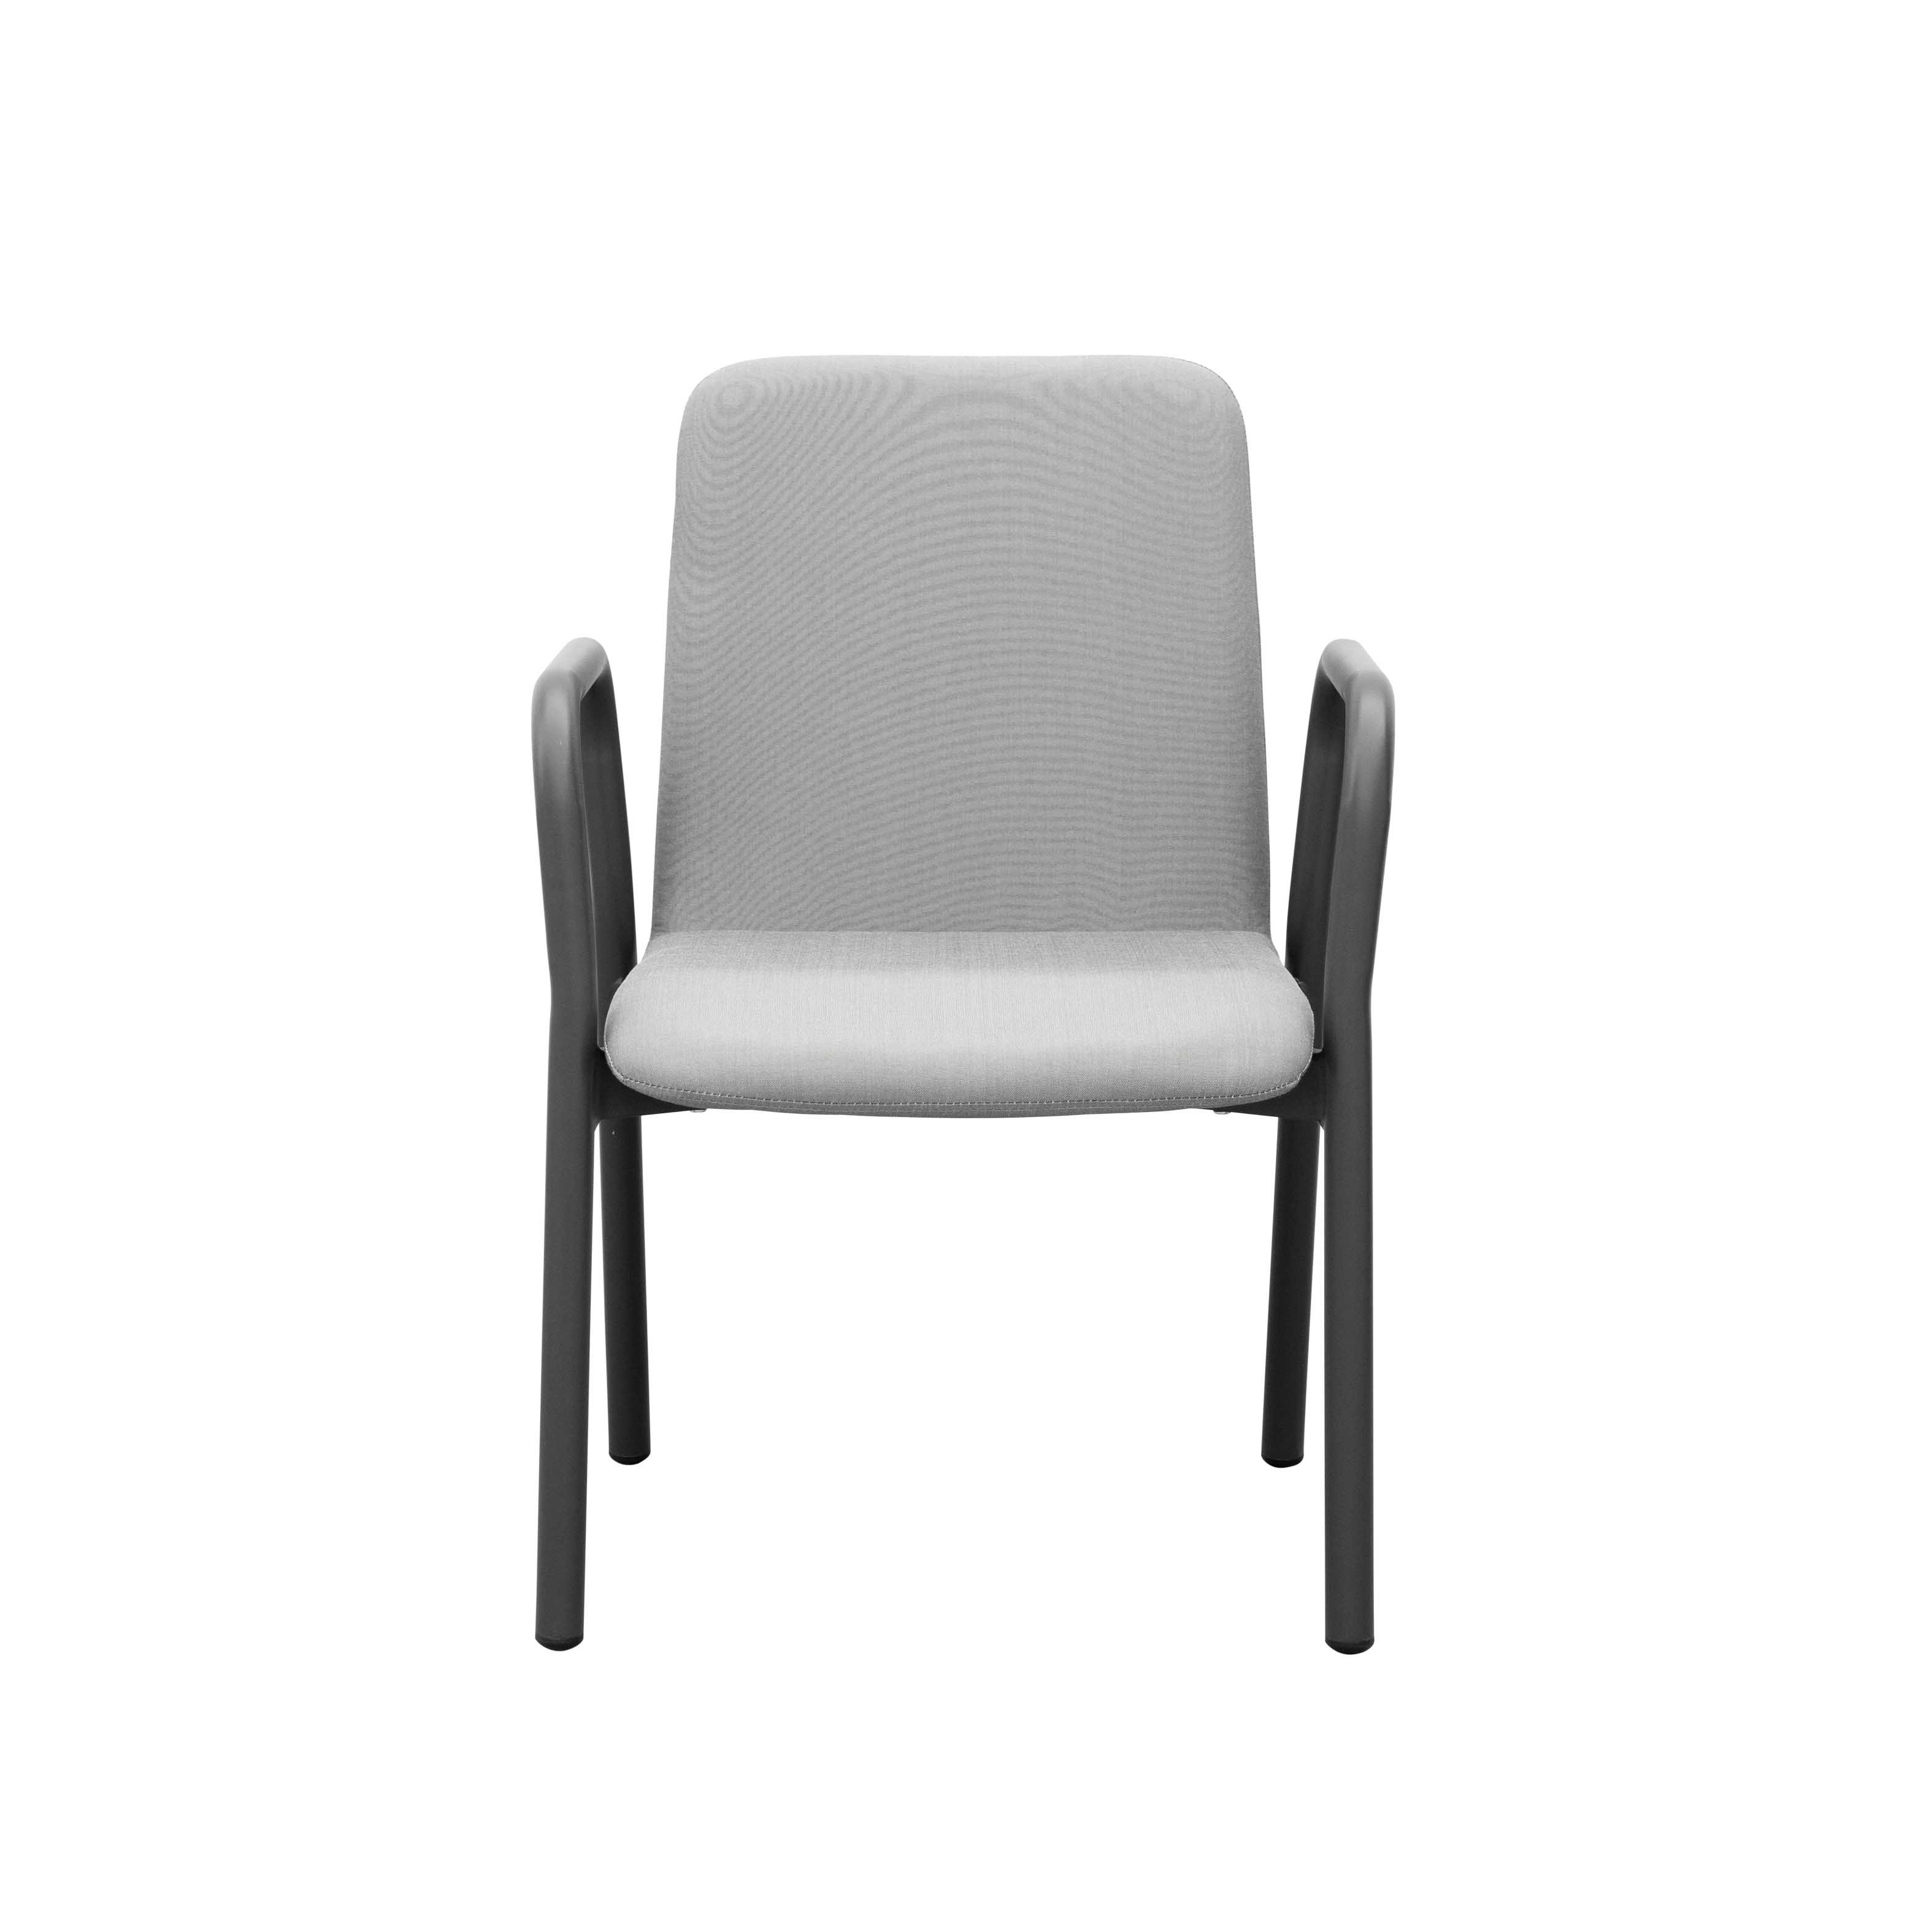 Houston fabric dining chair S6